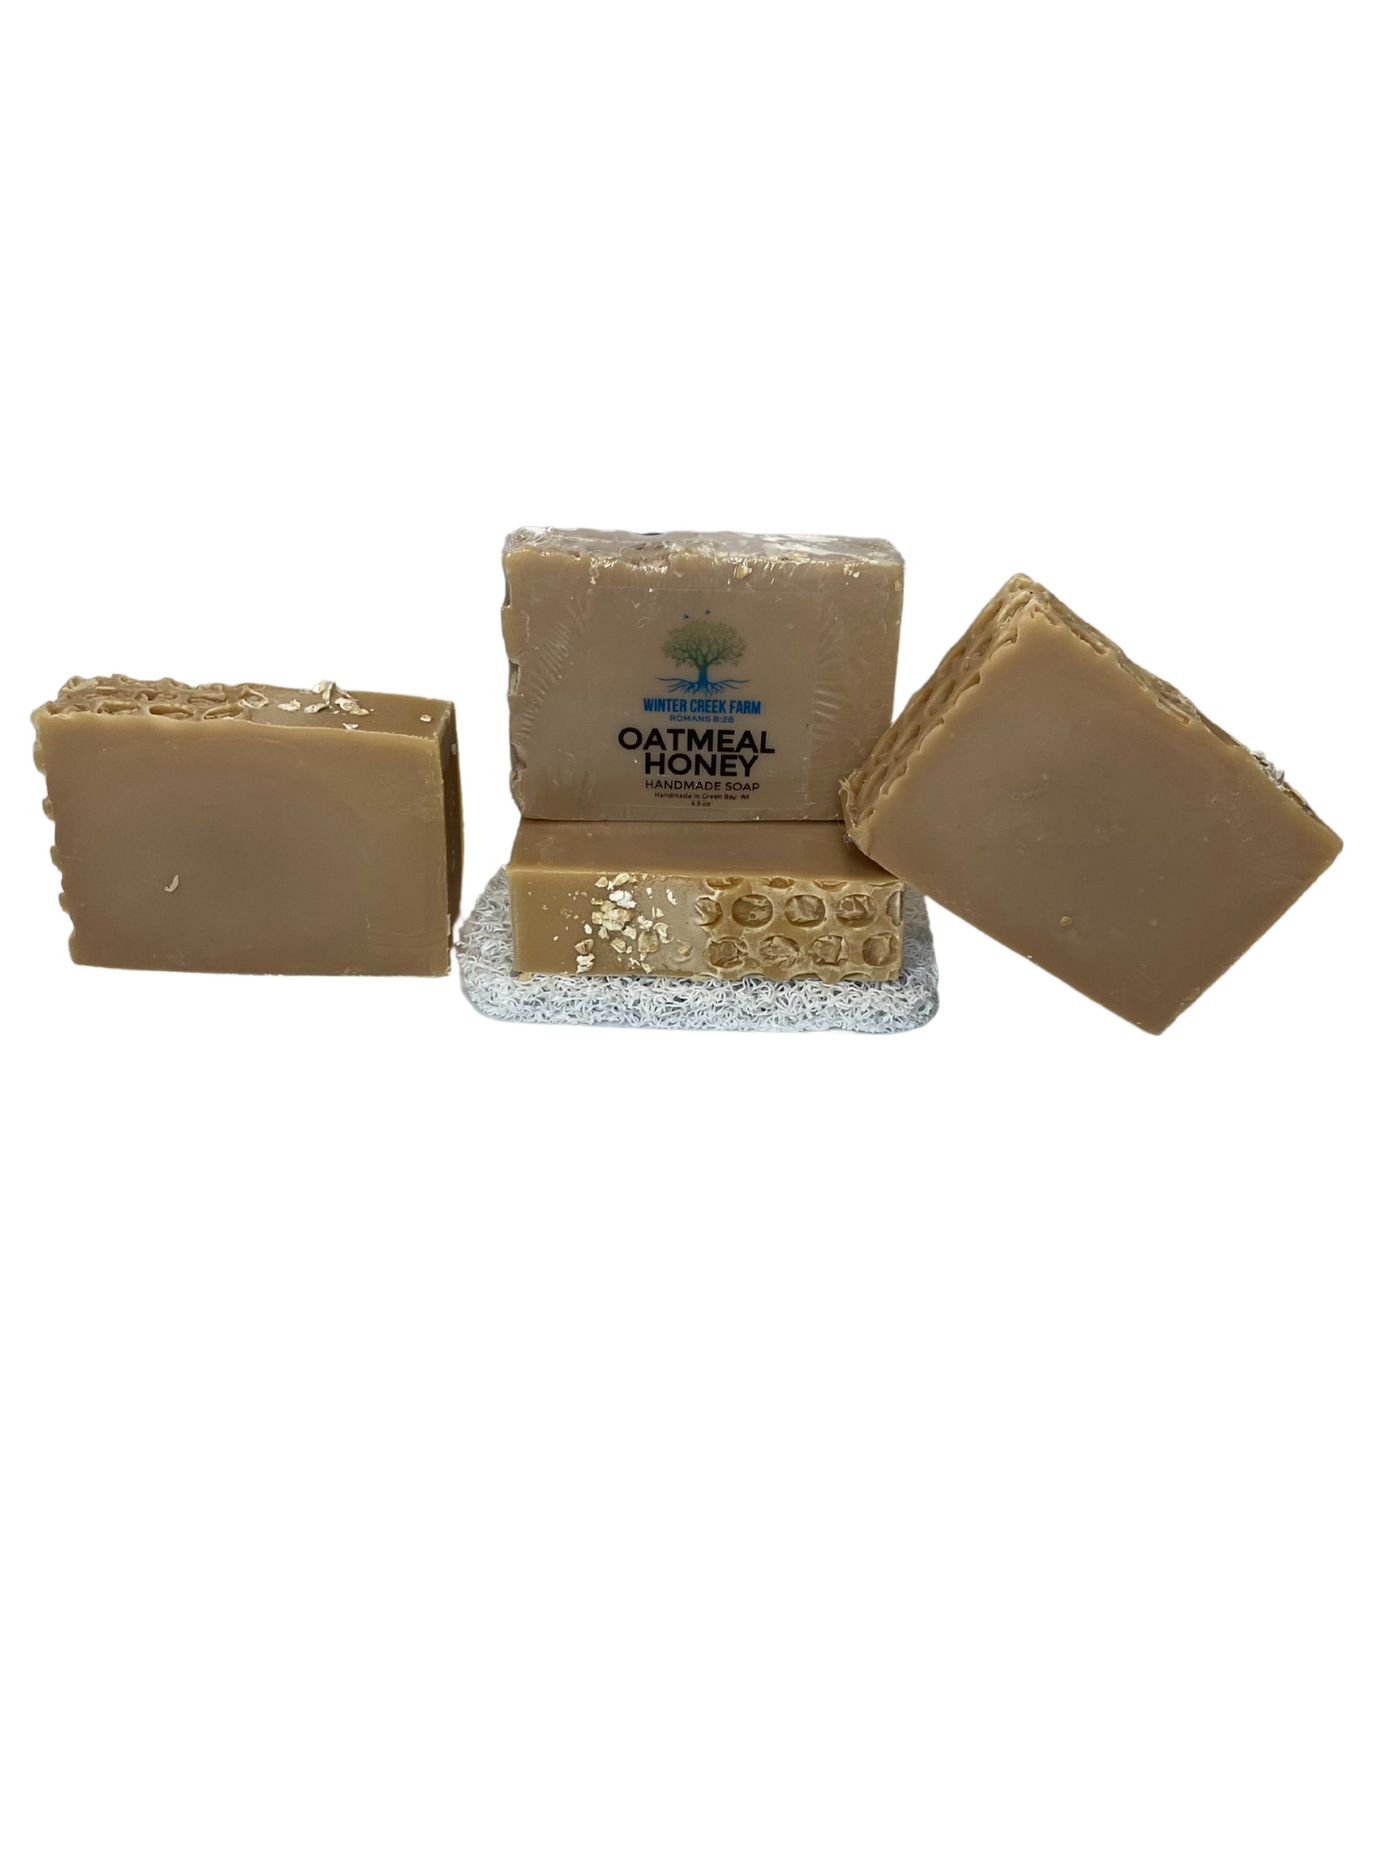 Oatmeal Honey Soap | Natural Oils and Butters | Cold Process Soap | Soap for Him | Gift for her | Gift for Self | Handmade Soap